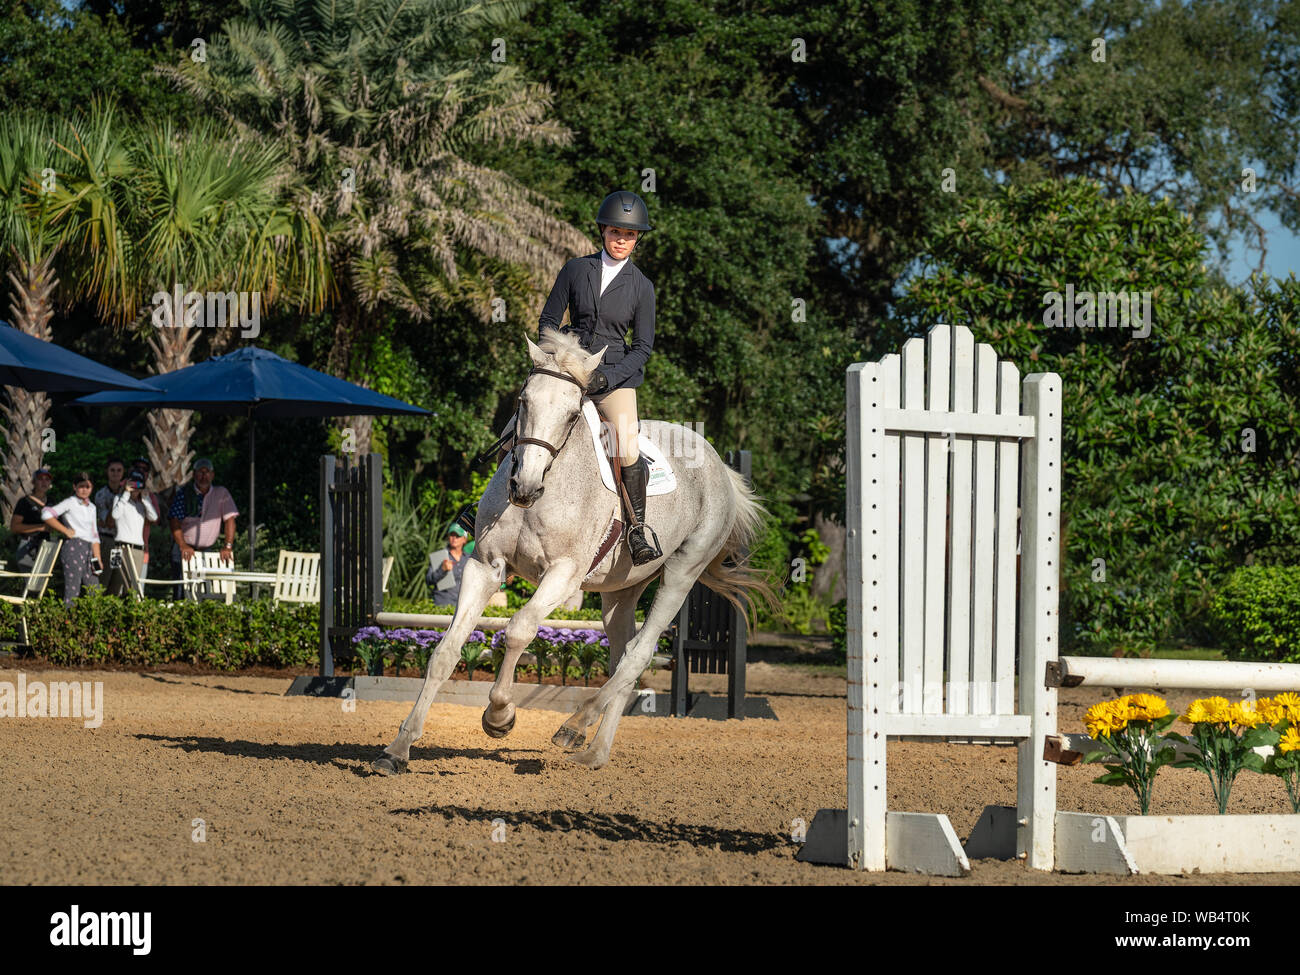 A young equestrian is competing in a horse show in Florida Stock Photo